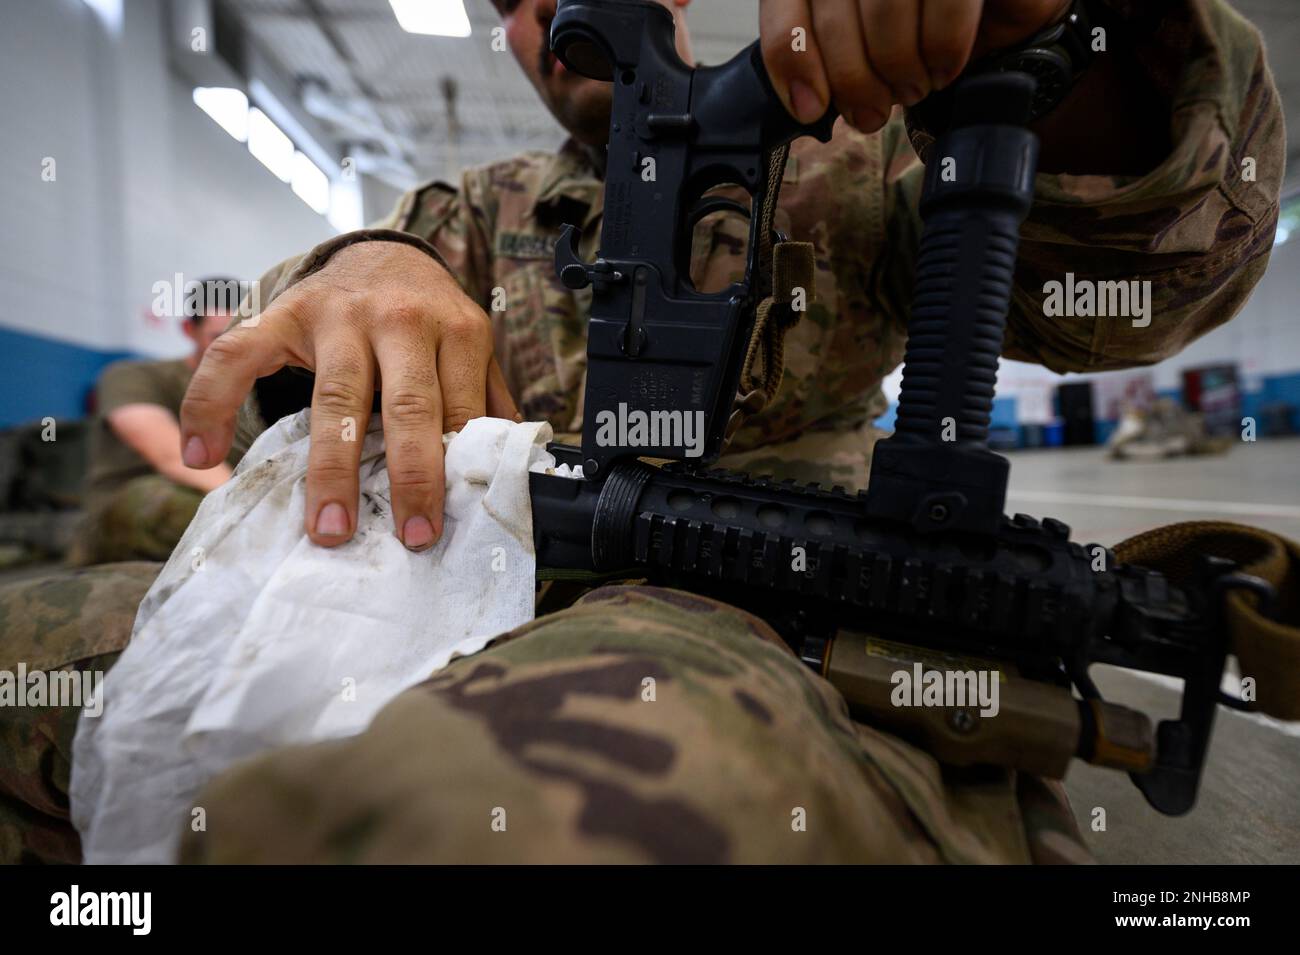 U.S. Army Sgt. Kirby Vargas, from Bravo Company, 1st Battalion, 114th Infantry Regiment, conducts weapons maintenance at the Freehold National Guard Armory in Freehold, New Jersey, July 28, 2022. The Soldiers are cleaning their weapons after returning from the eXportable Combat Training Capability (XCTC) exercise, where more than 2,500 Soldiers participated in training event held in Fort Drum, New York, which enables brigade combat teams to achieve the trained platoon readiness necessary to deploy, fight, and win. Stock Photo